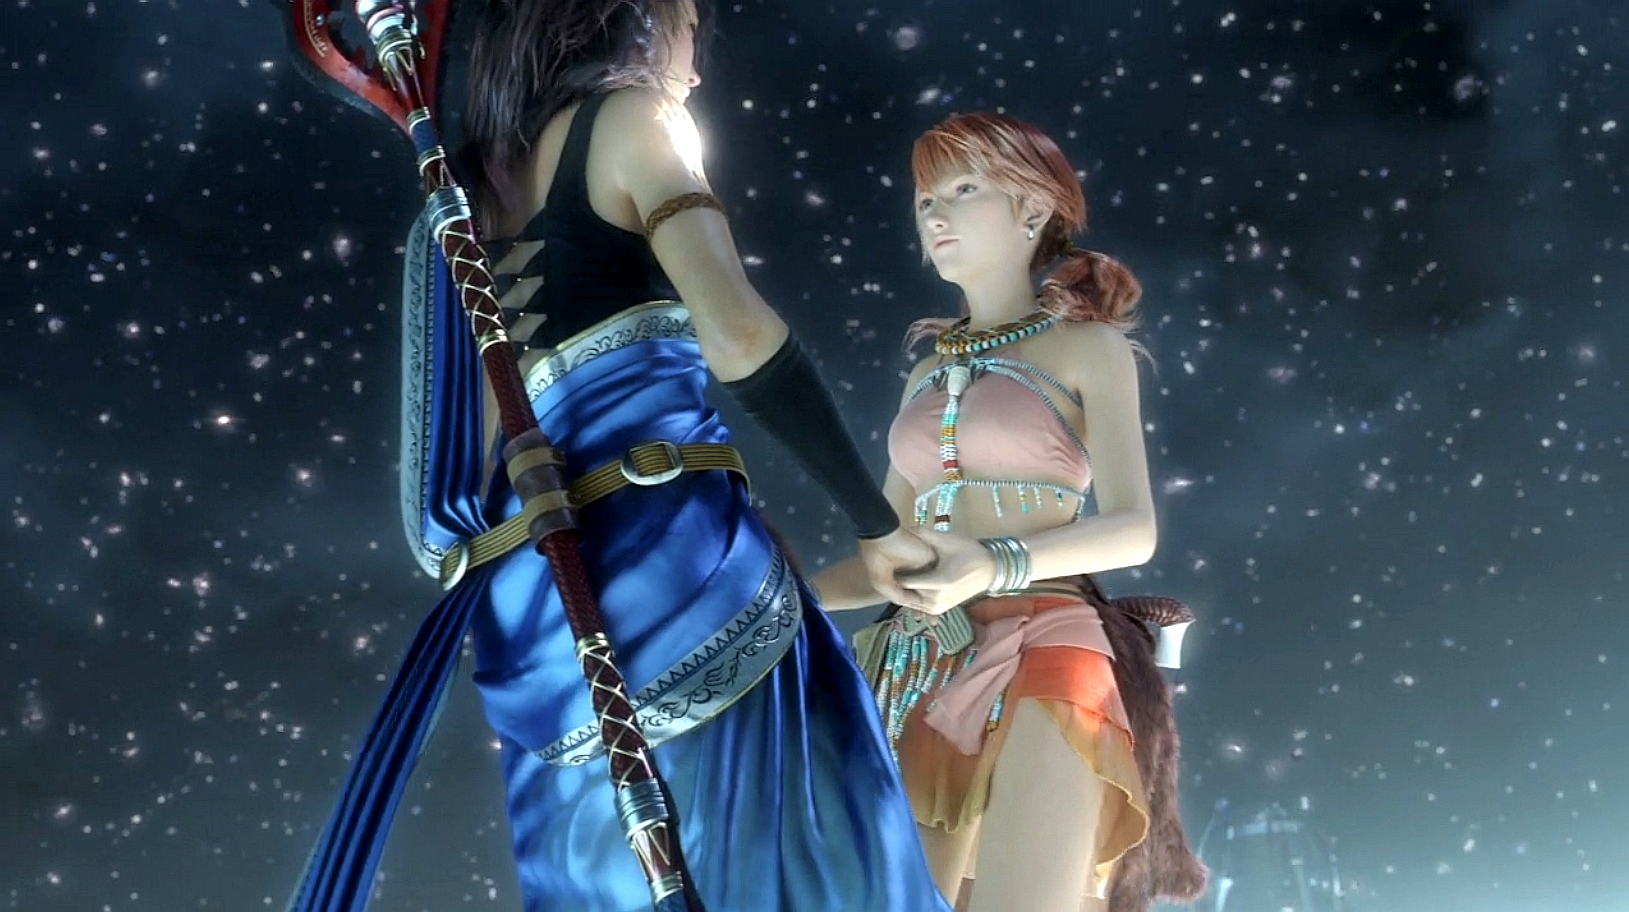 FFXIII deserves a mention for the powerful imagery in the ending ,and there...